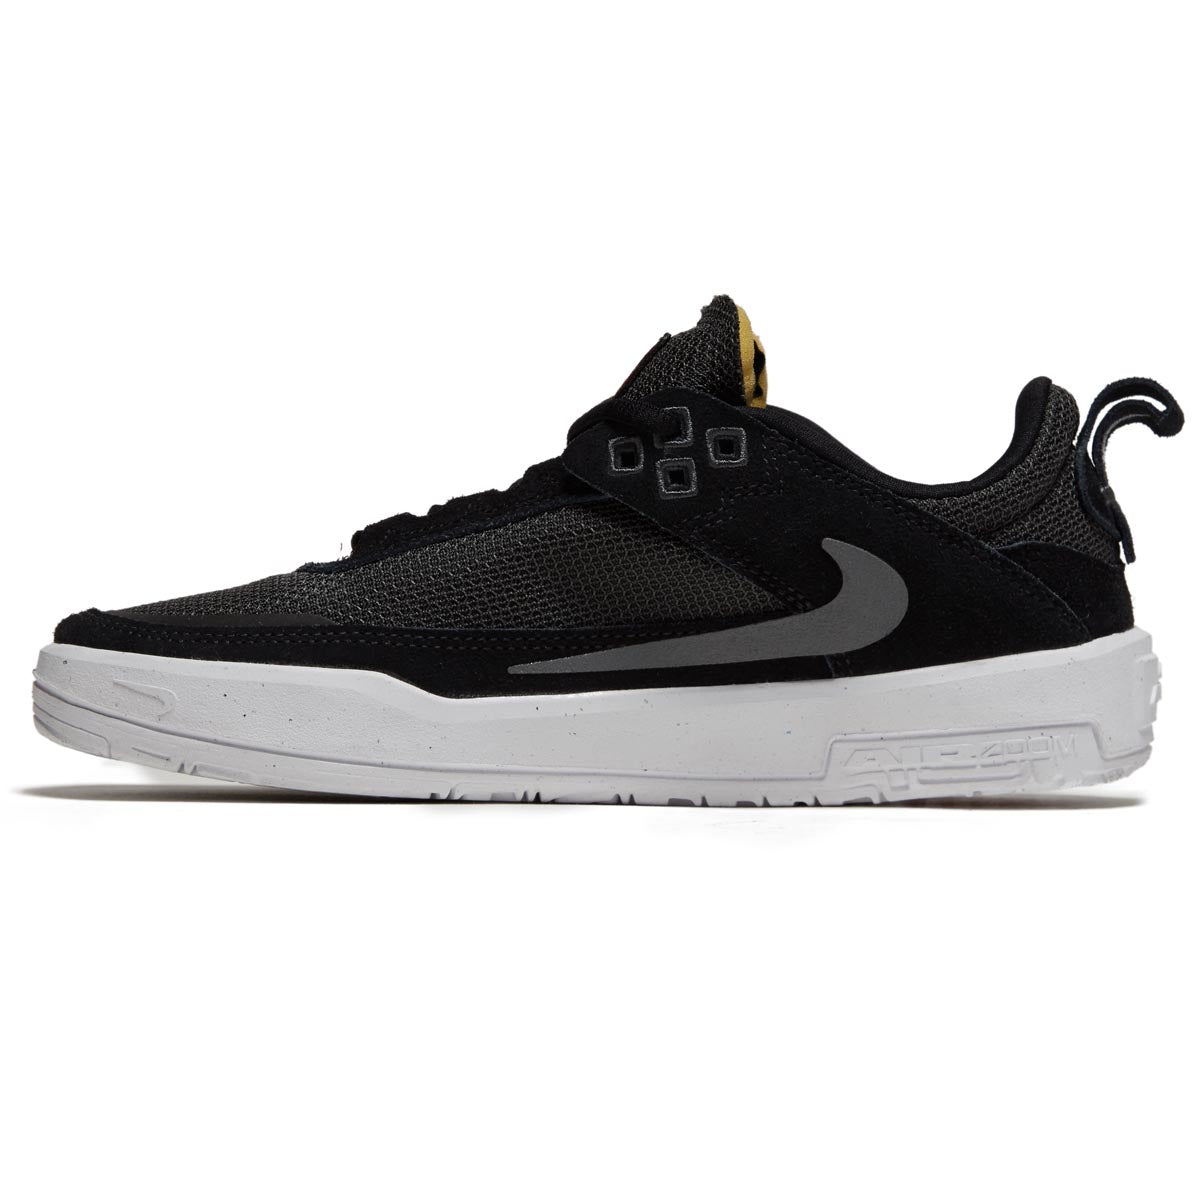 Nike SB Youth Burnside Shoes - Black/Cool Grey/Anthracite/Alchemy Pink image 2